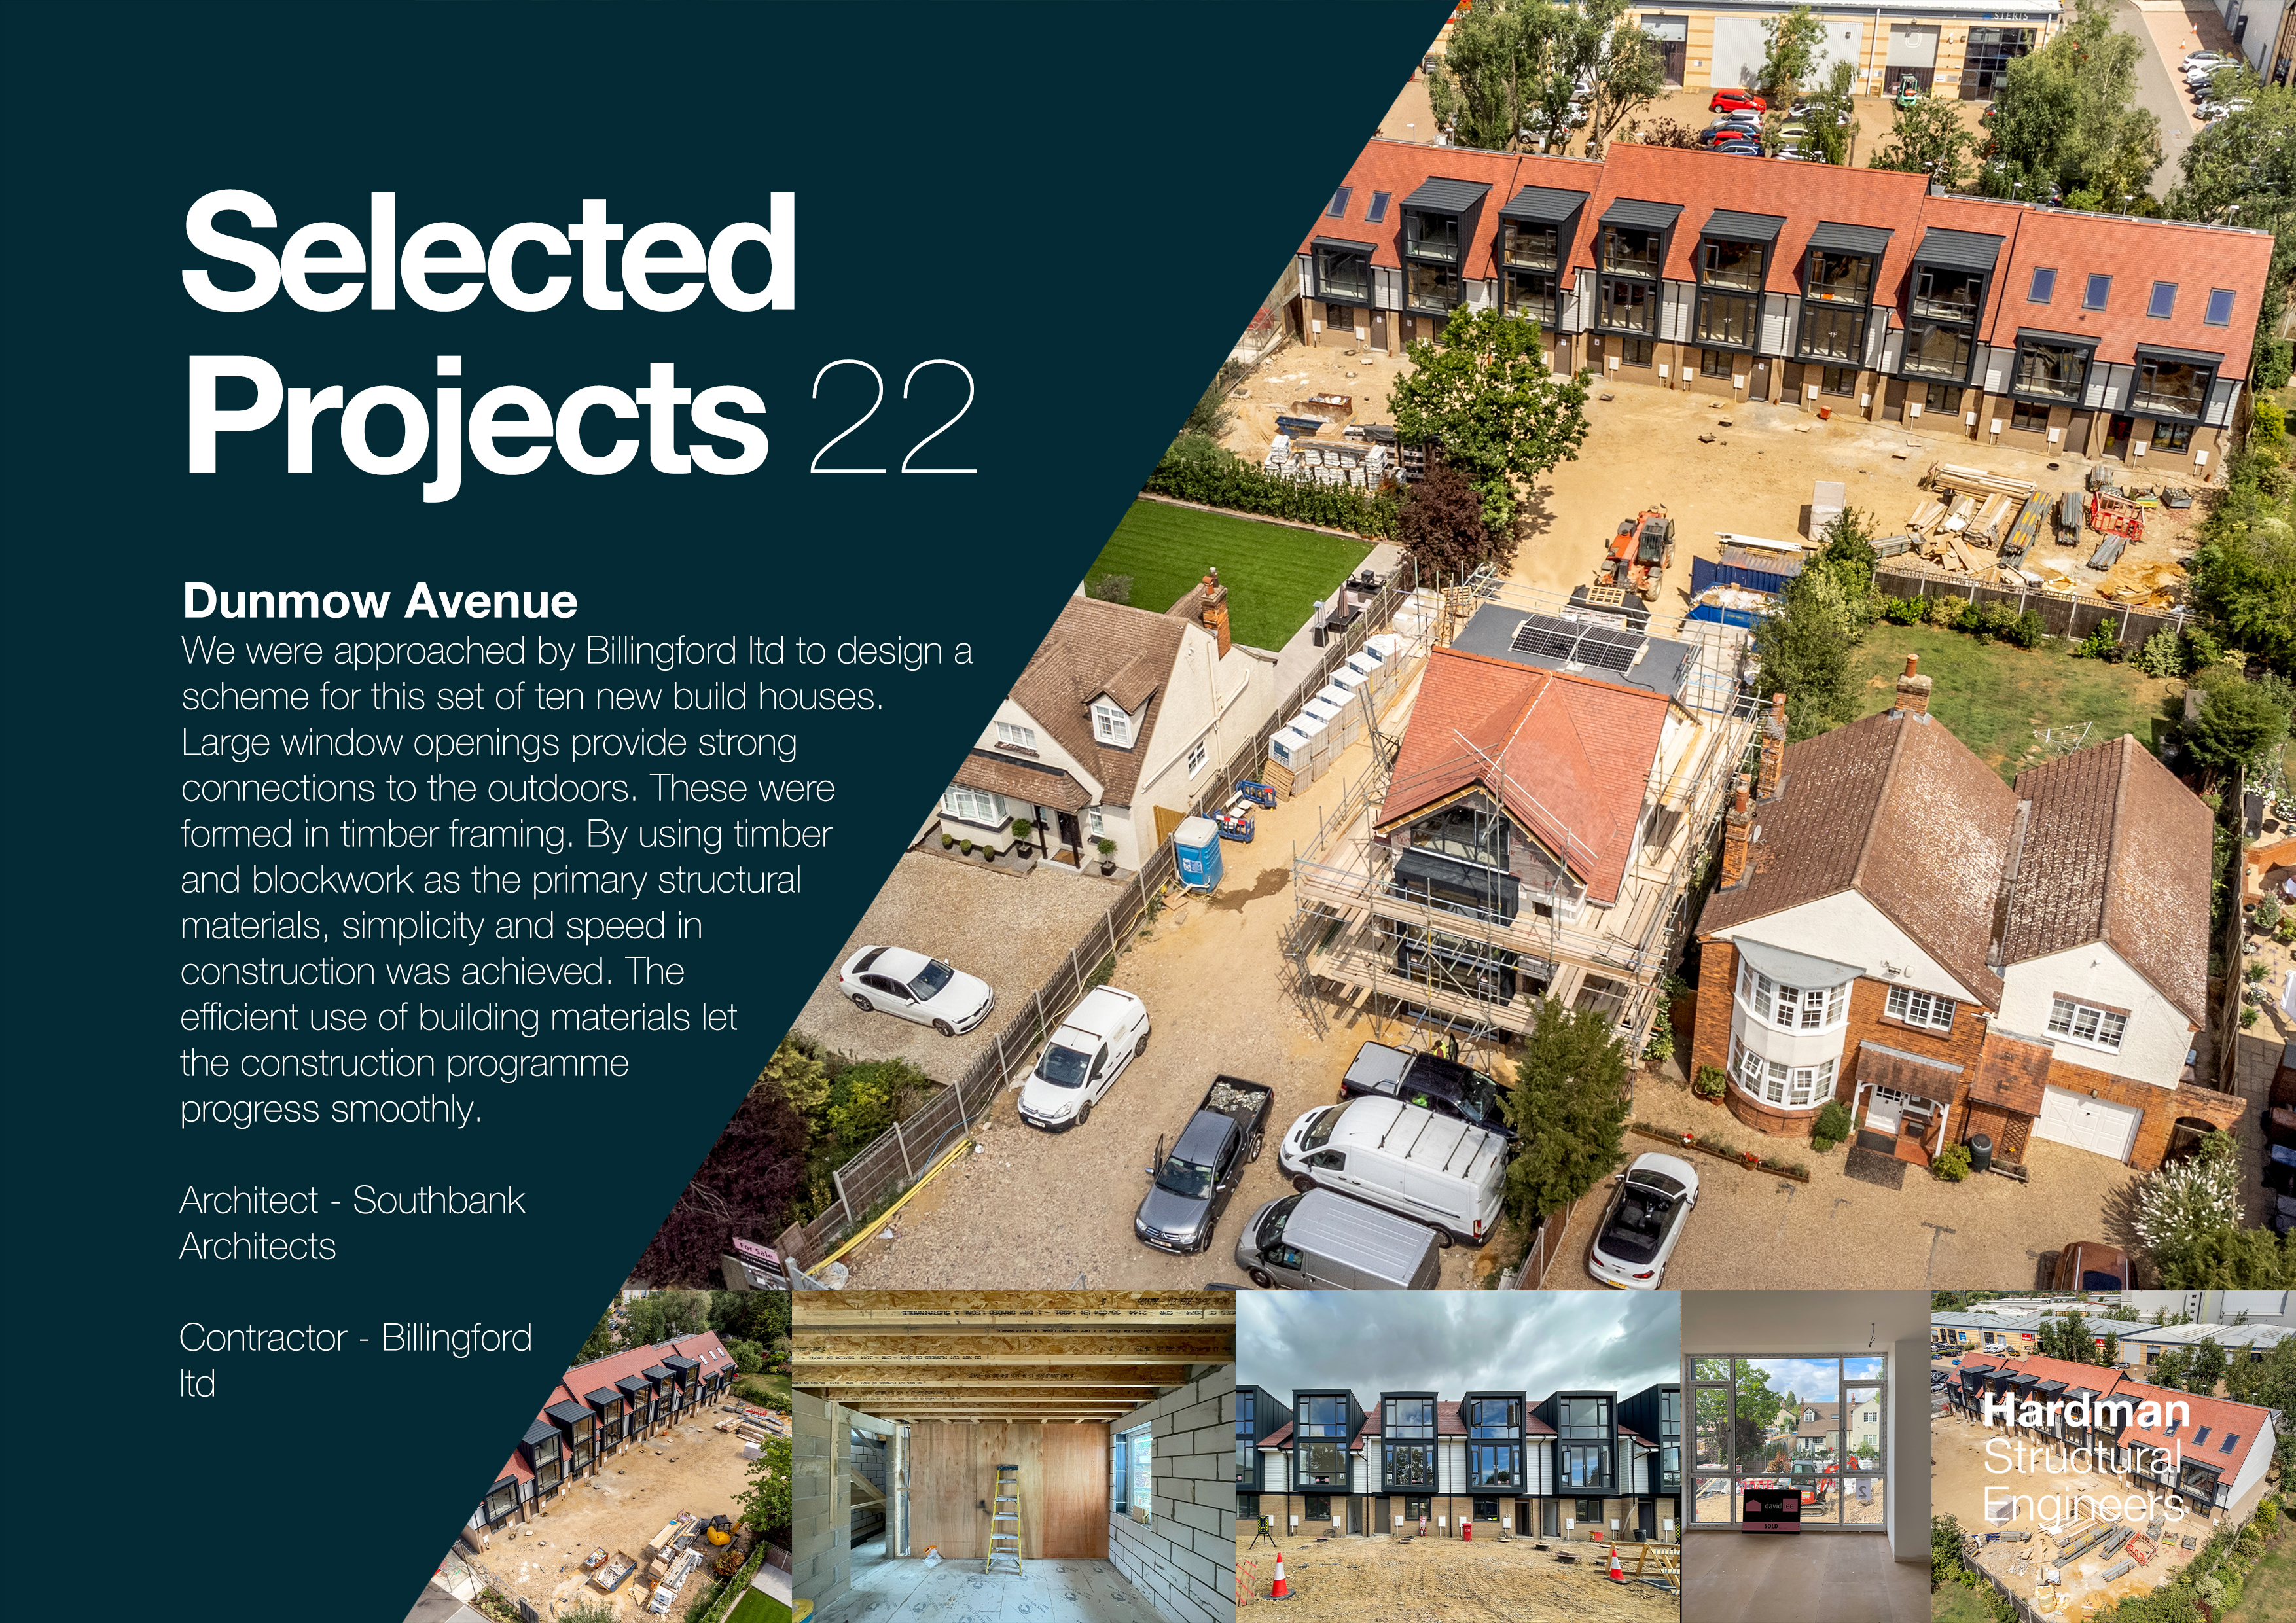 Selected Projects - Dunmow Avenue